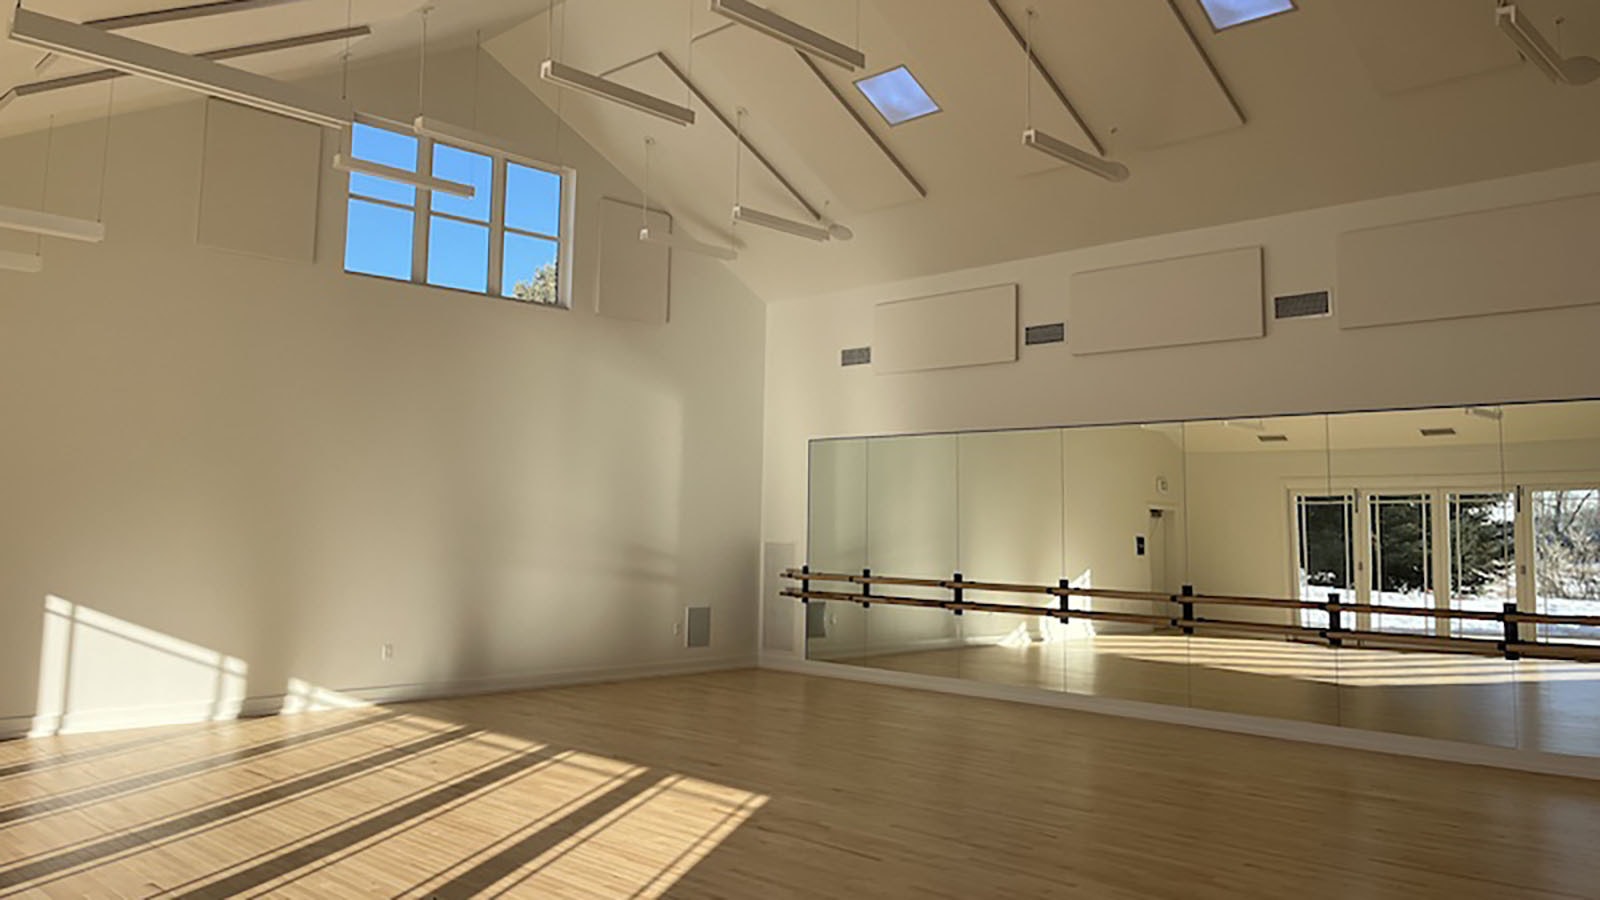 The state-of-the-art Lauren Anderson Dance Studio at Ucross will be home for Jack Wolff of the Houston Ballet for a creative residency.